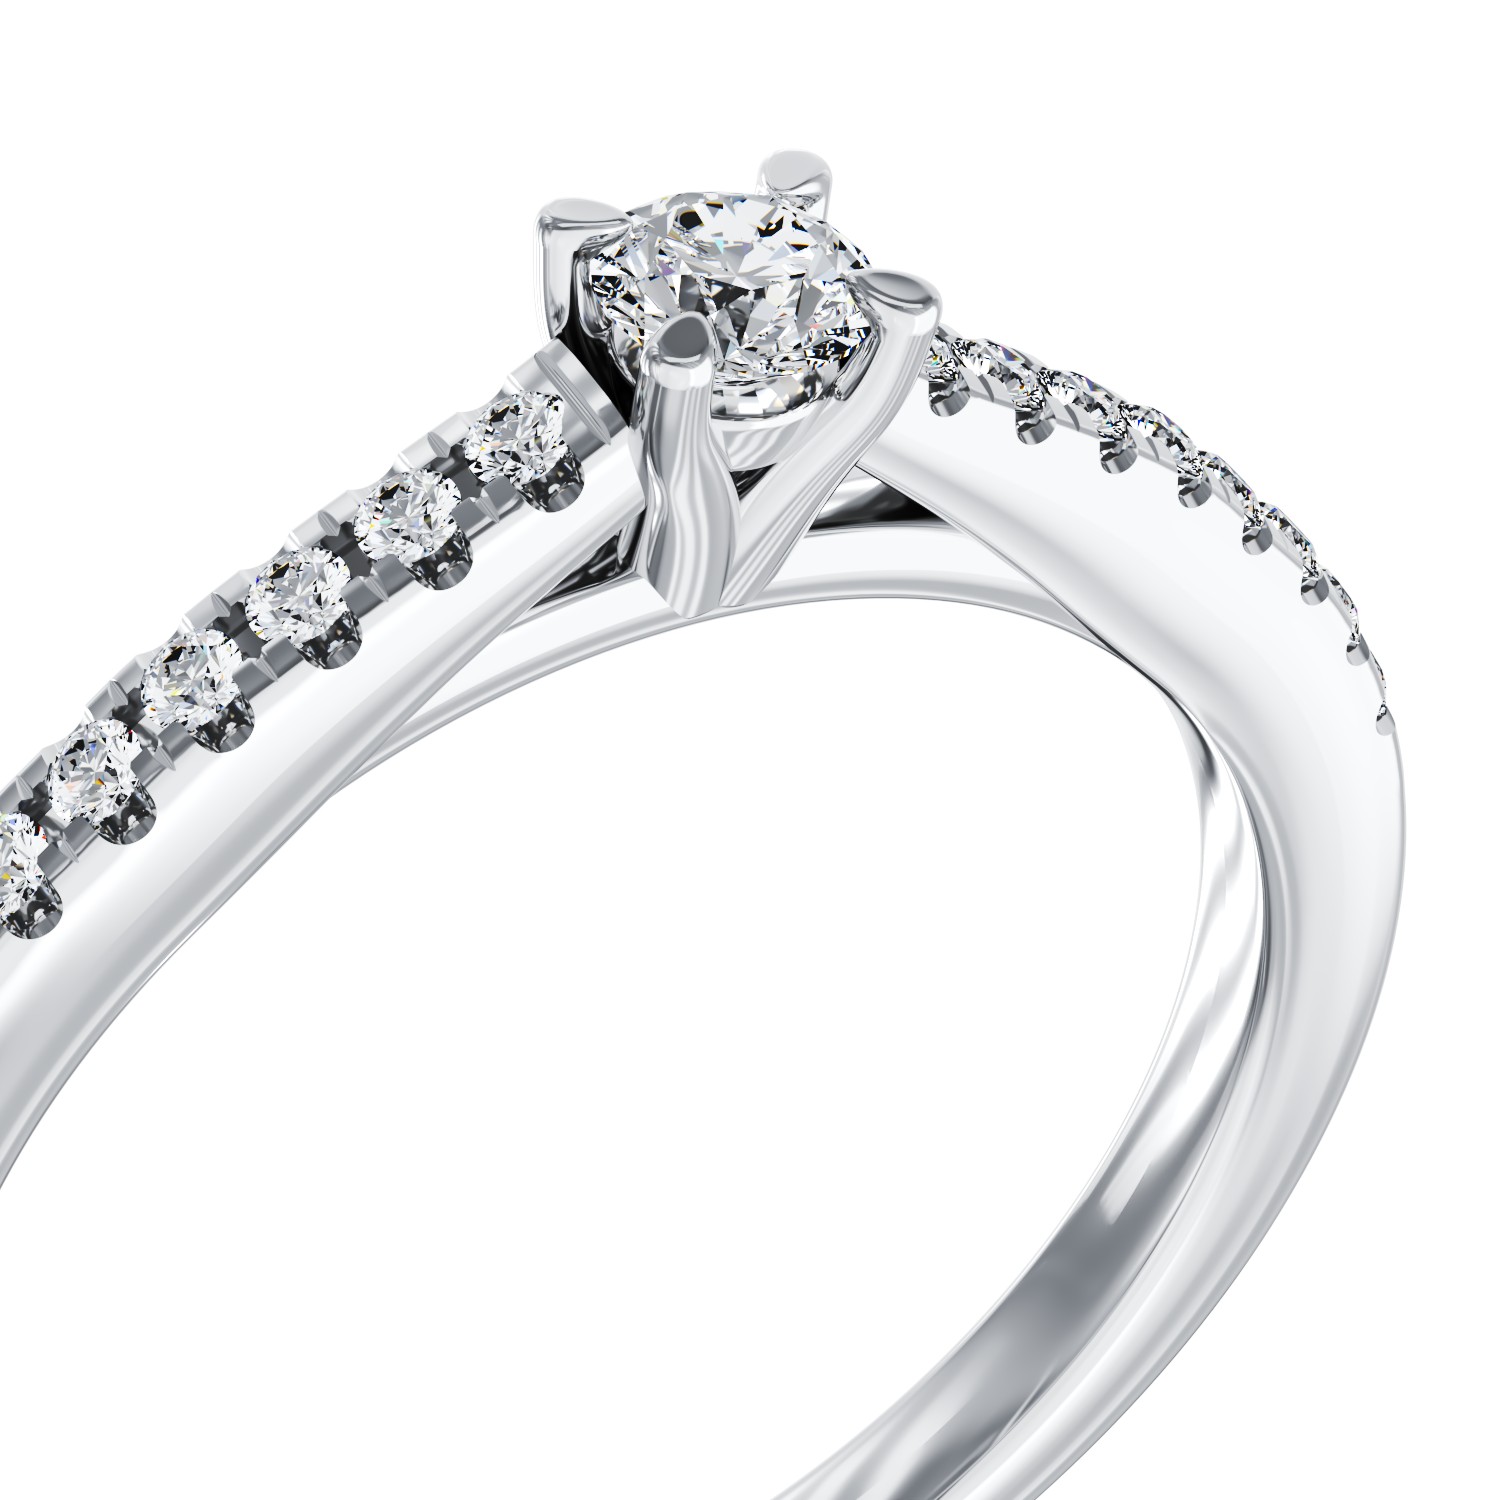 White gold engagement ring with 0.2ct diamonds